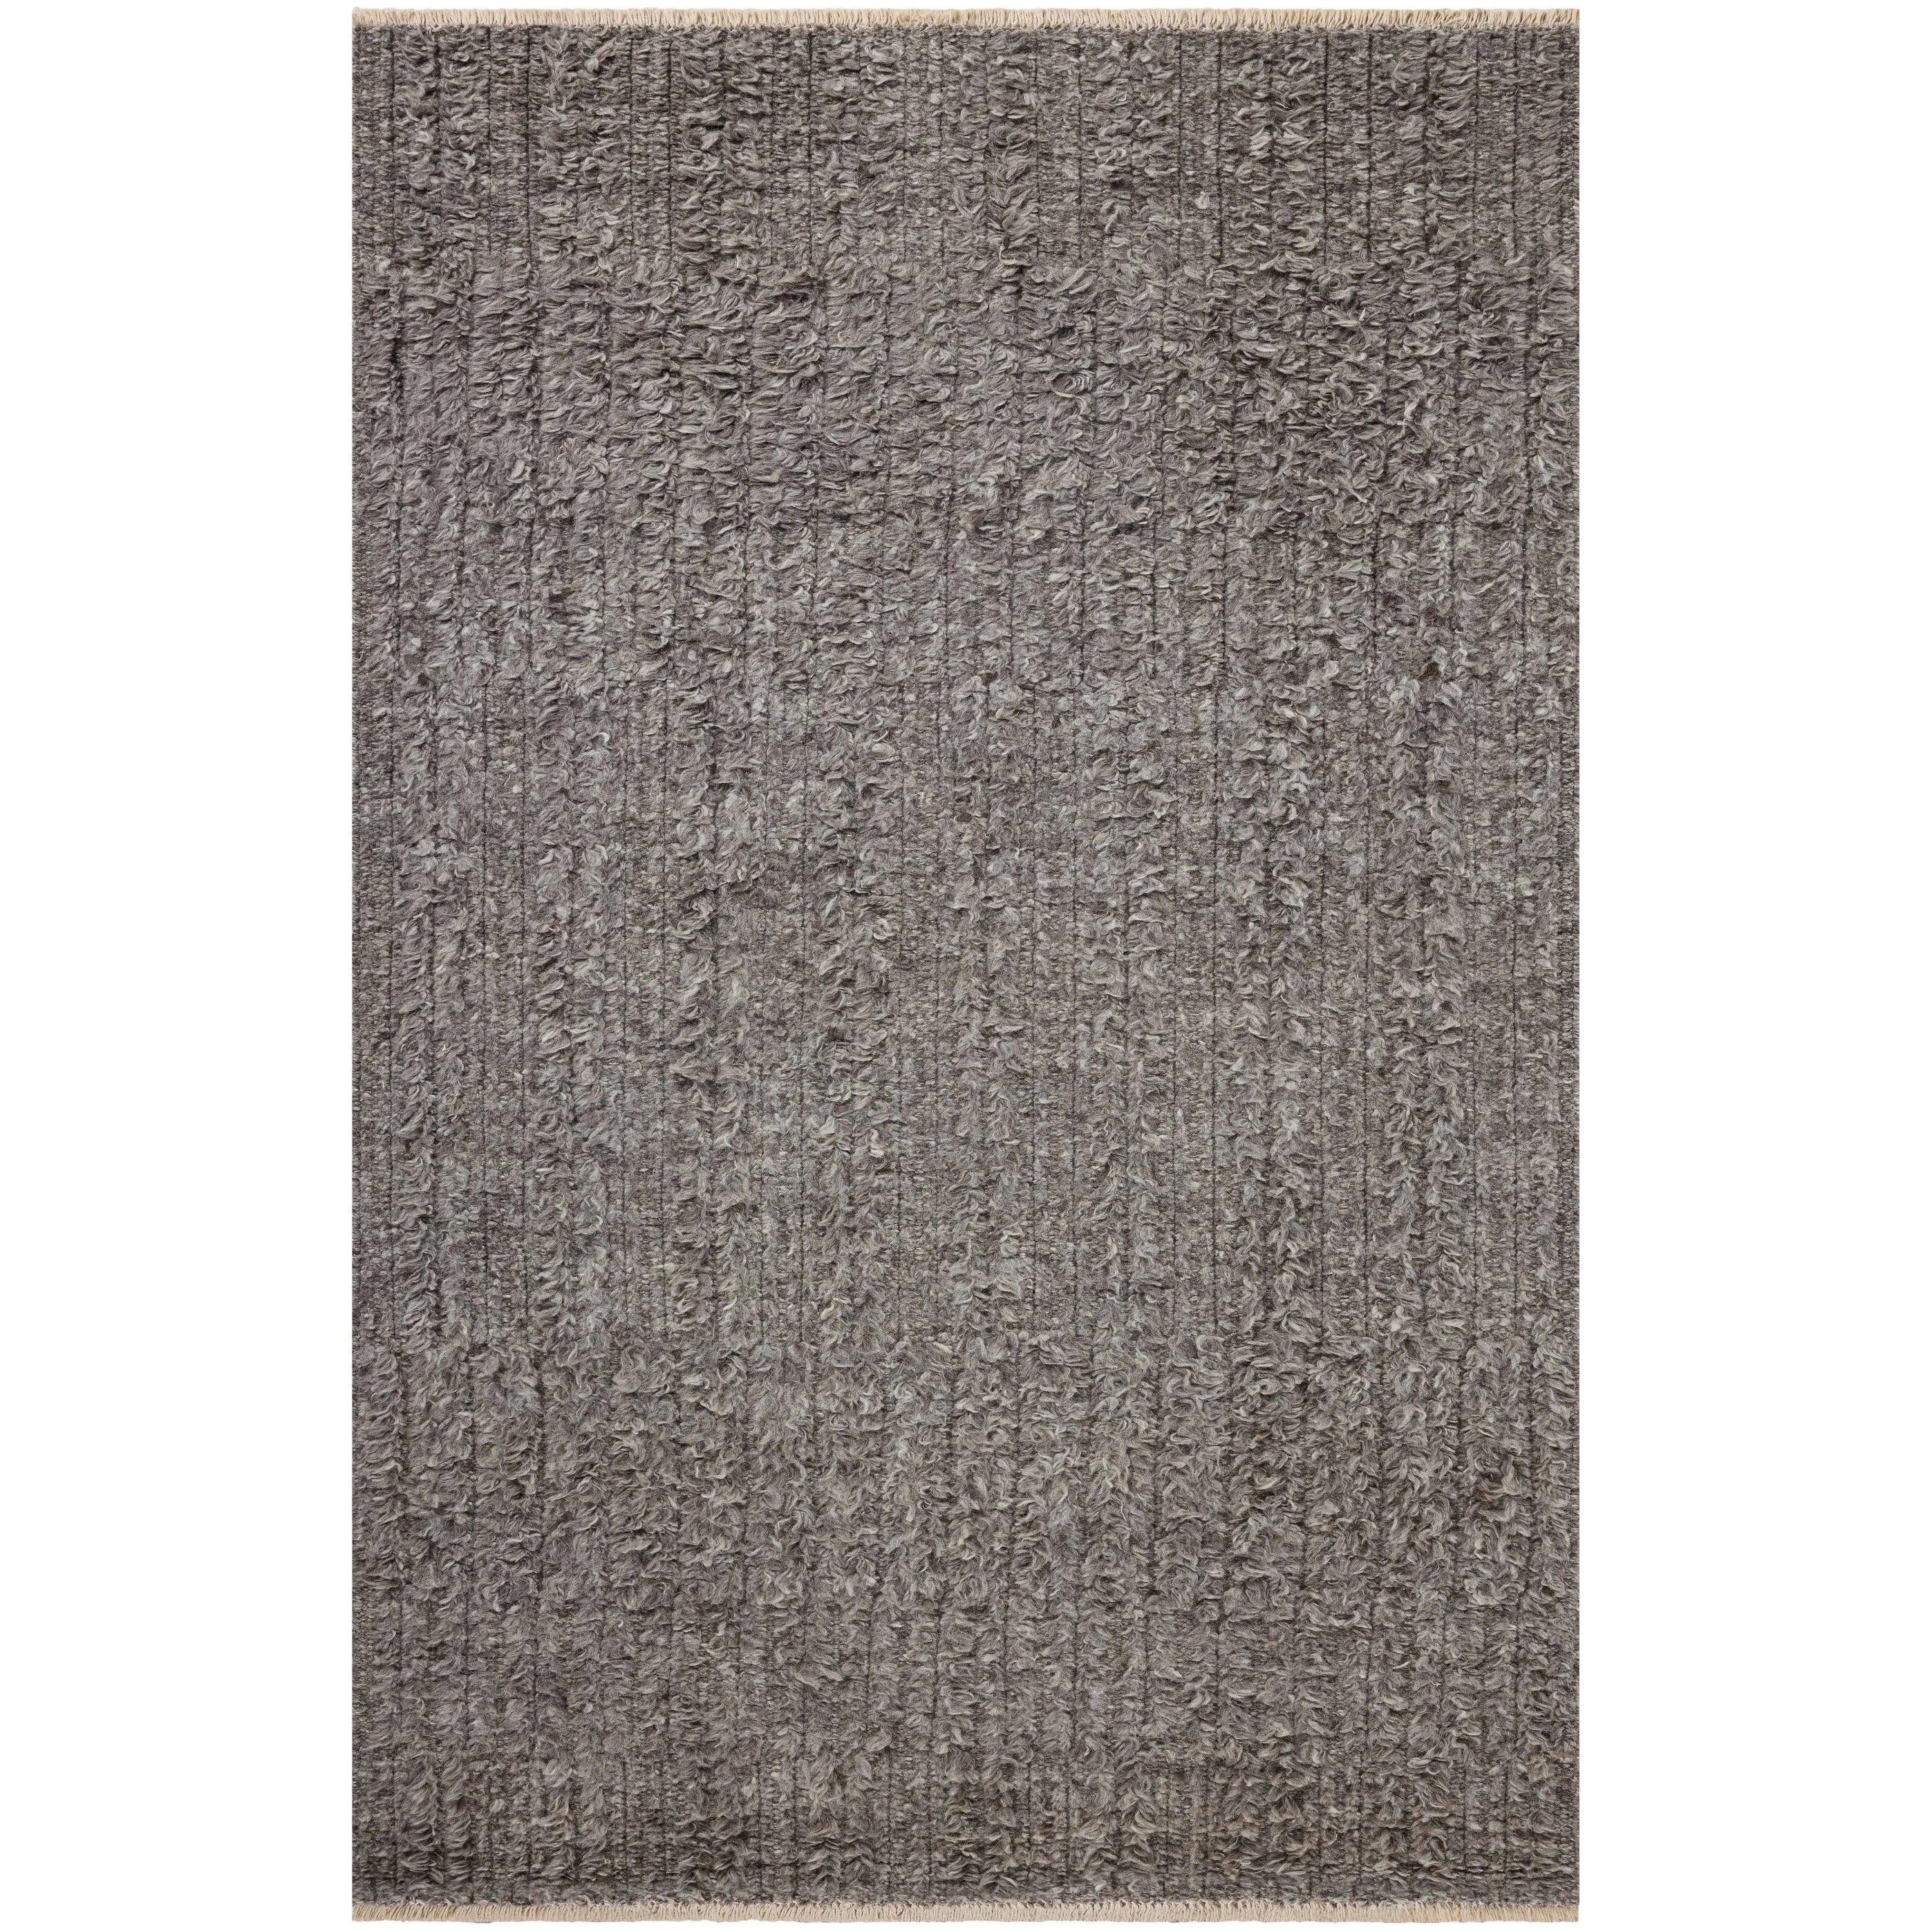 Irresistible to walk upon, the Dana Granite Rug by Brigette Romanek x Loloi has a high-low texture that alternates between a subtly shaggy pile and a soft base. Horizontal broken stripes give the area rug a fresh and energized structure, while a finish of fringe along the edges accentuates its sense of movement. Amethyst Home provides interior design, new home construction design consulting, vintage area rugs, and lighting in the Miami metro area.